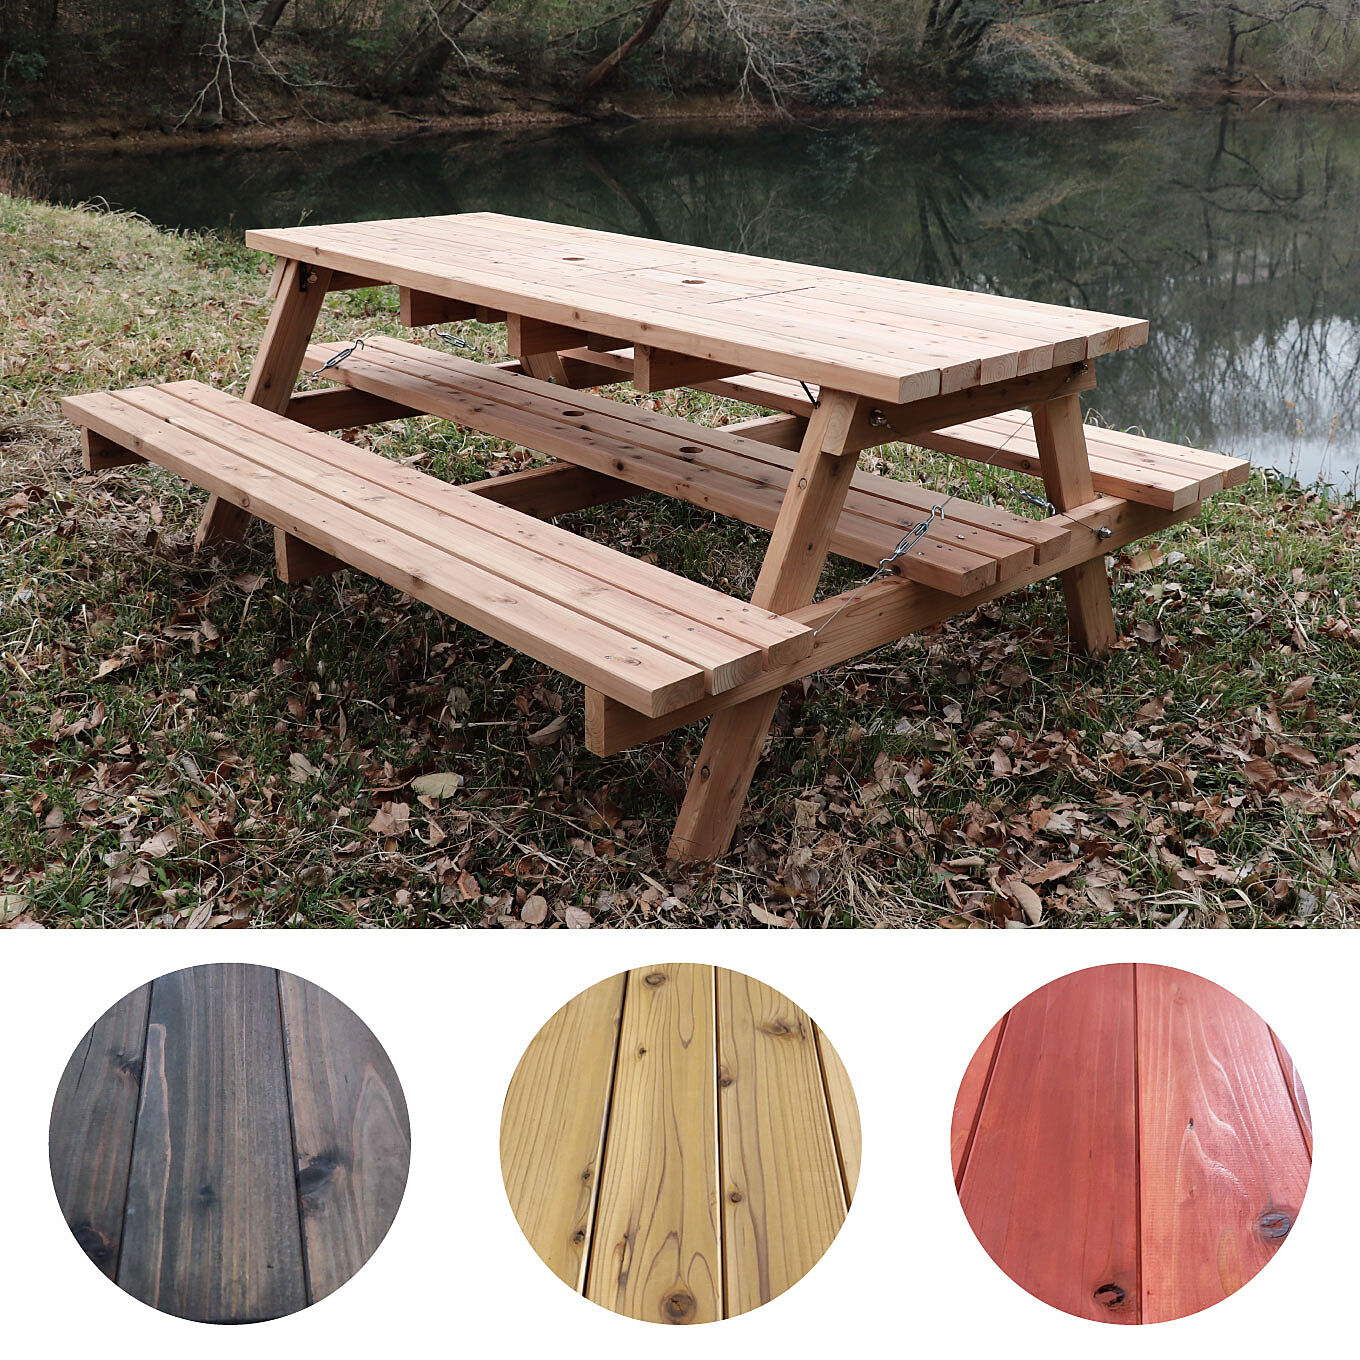 「OK-DEPOT material Picnic table（パラソル穴1か所 コンロ受け）」モニター3名様大募集！